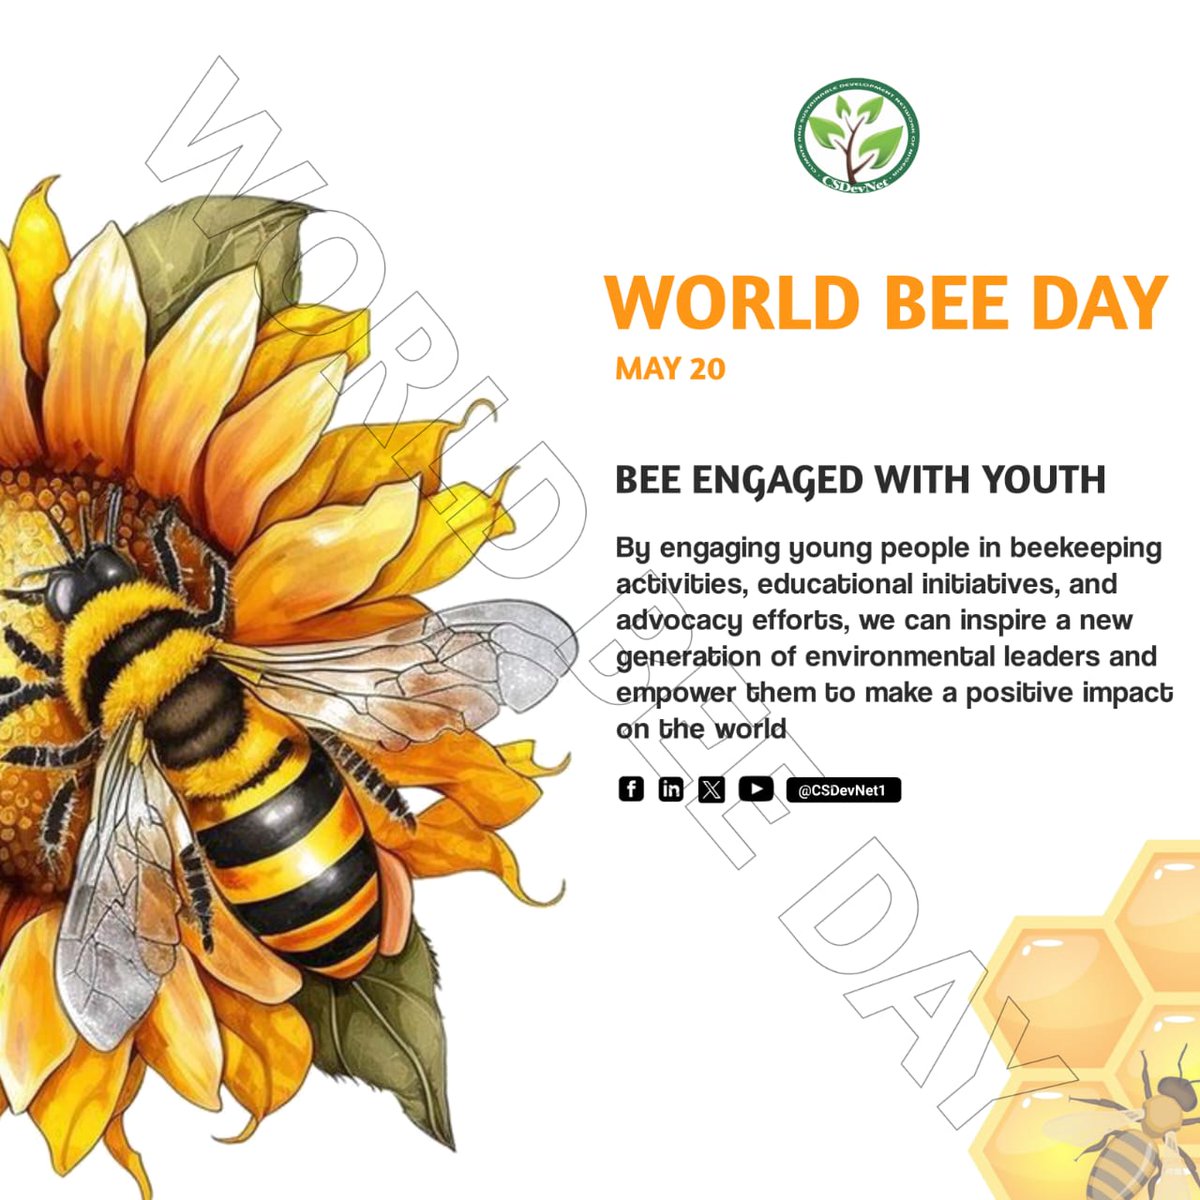 It is #WorldBeeDay! 🌻🌺🏵 🐝🐝🐝 🐝 🐝 🍯 This year's theme 'Bee engaged with Youth' highlights the importance of involving young people in beekeeping & pollinator conservation efforts, recognising them as future stewards of our environment. #WhatHasChanged? #Act4Nature